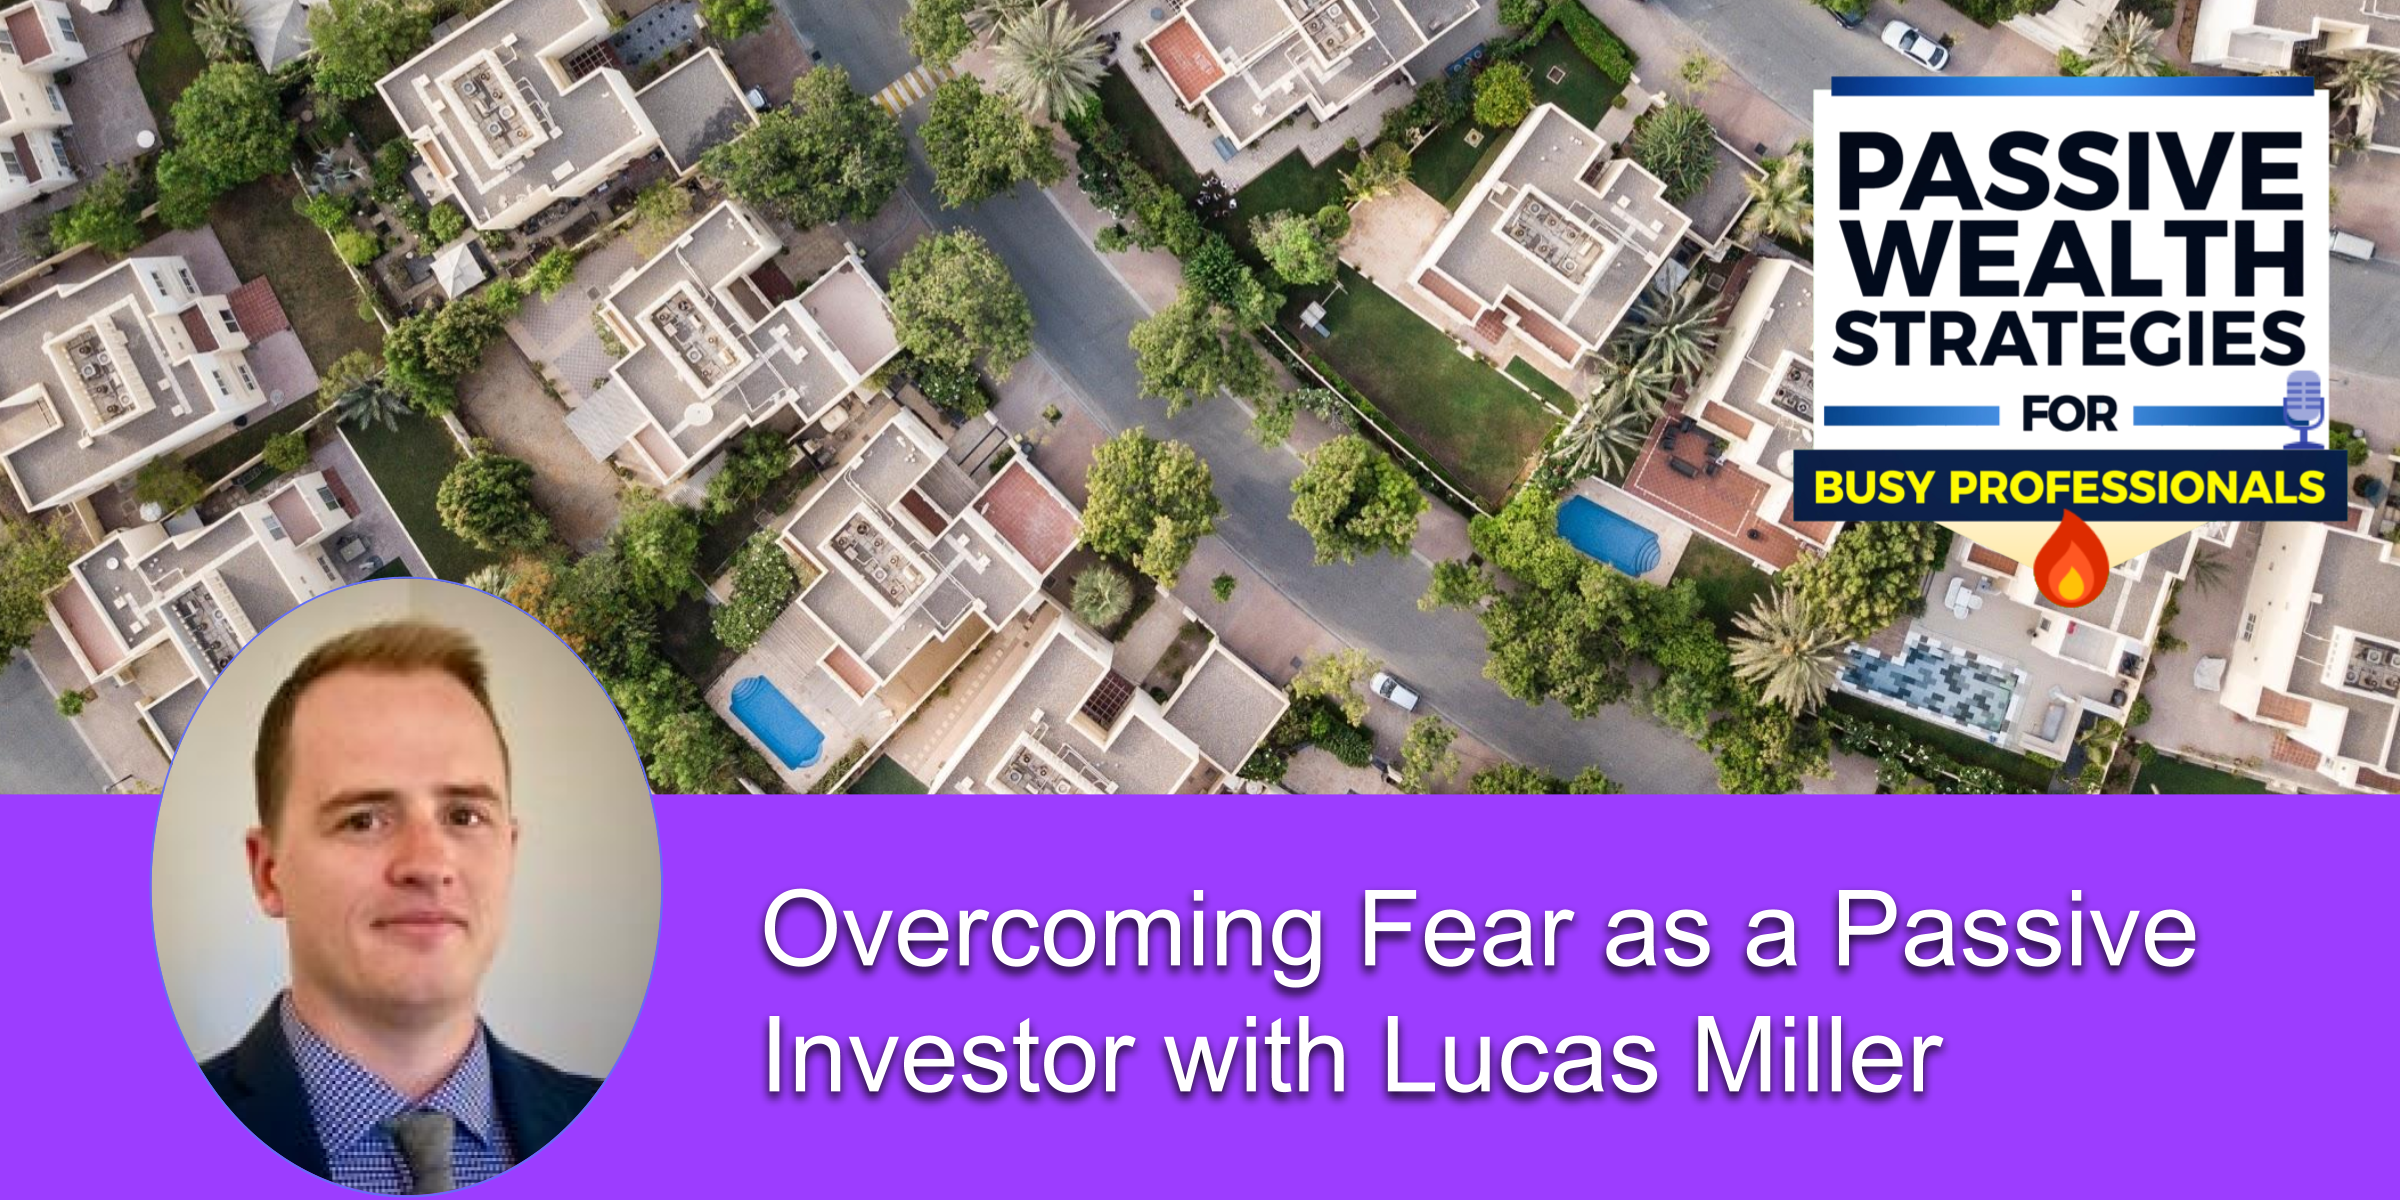 Overcoming Fear as a Passive Investor with Lucas Miller